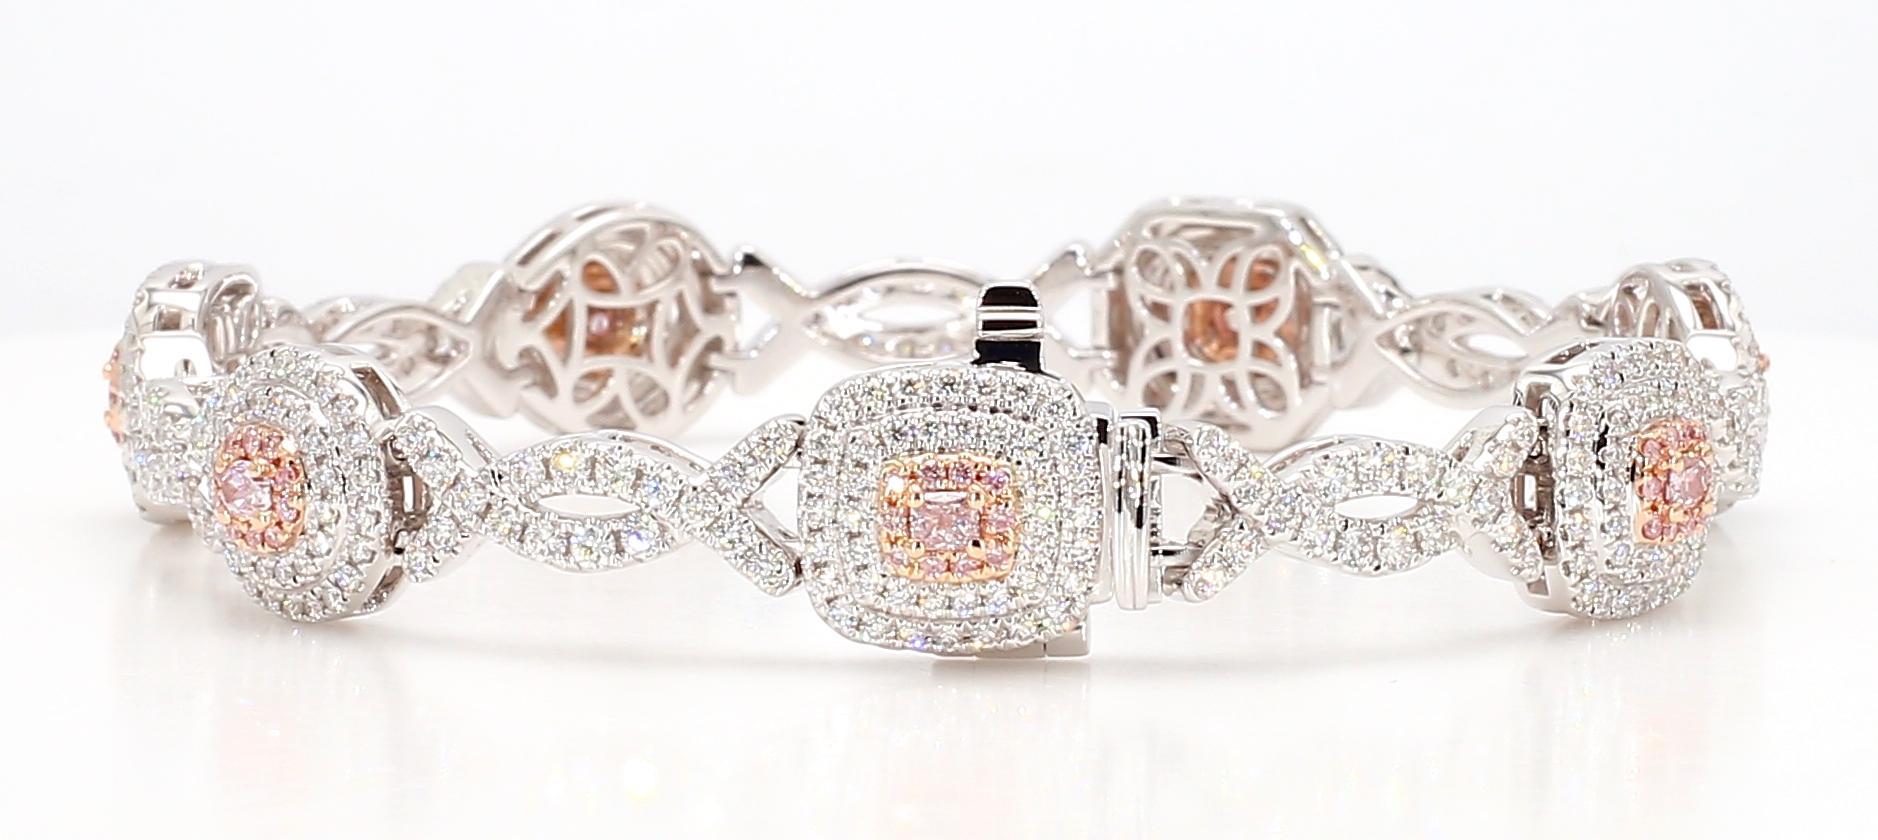 RareGemWorld's intriguing diamond bracelet. Mounted in a beautiful 18K Rose and White Gold setting with 1 natural oval cut pink diamond, 3 natural cushion cut pink diamonds, 1 natural radiant cut pink diamond, and 2 natural pear cut pink diamonds.